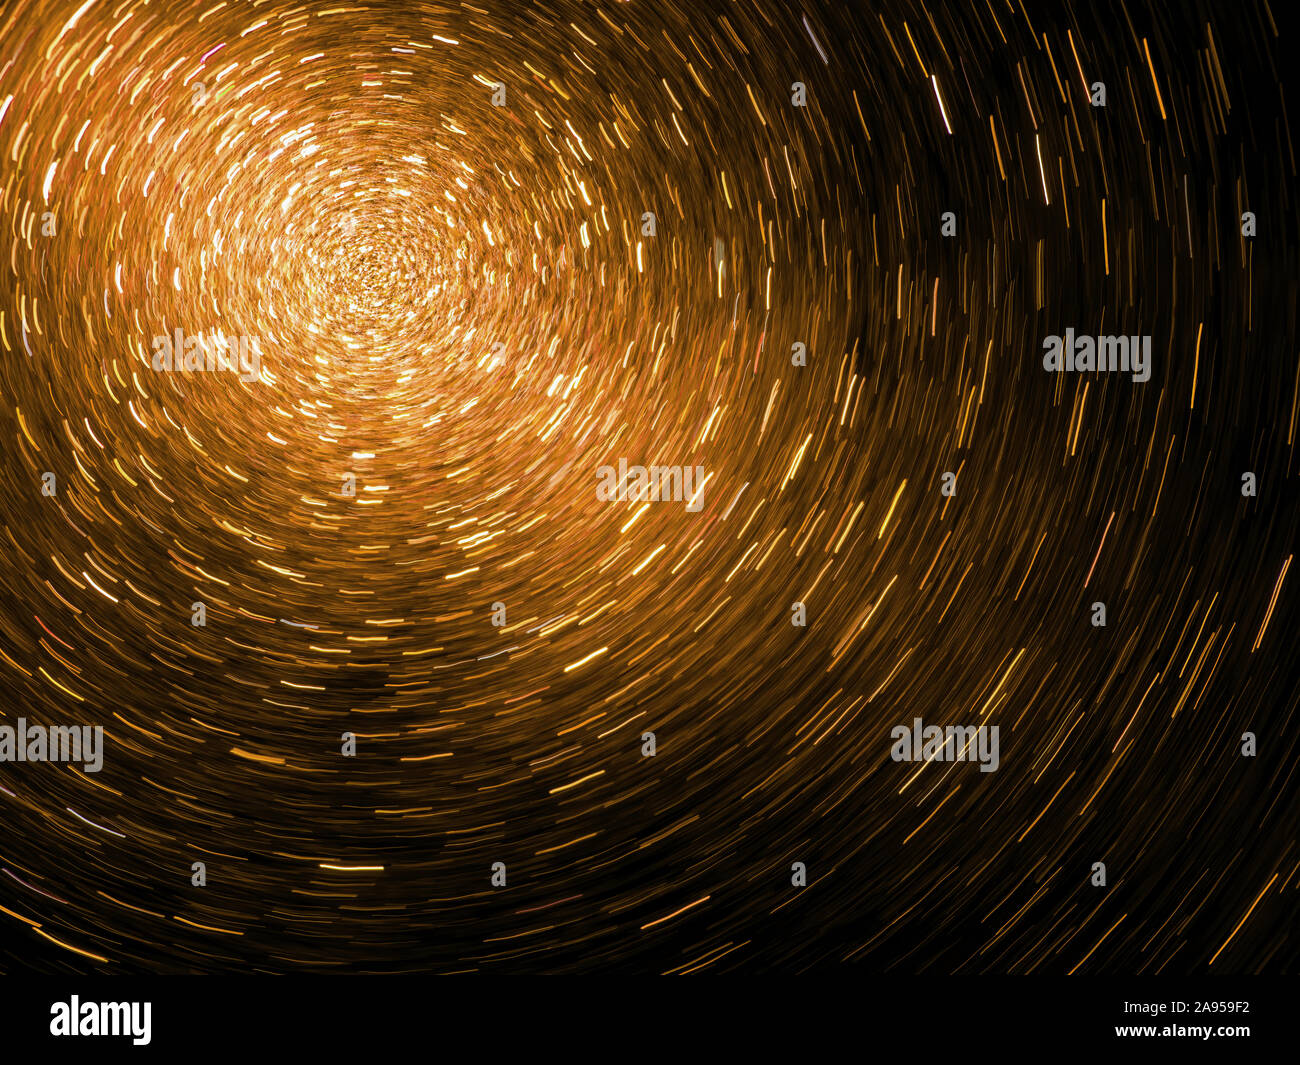 Swiring vortex of light - particles. Science - physics maybe. Dark background. Stock Photo